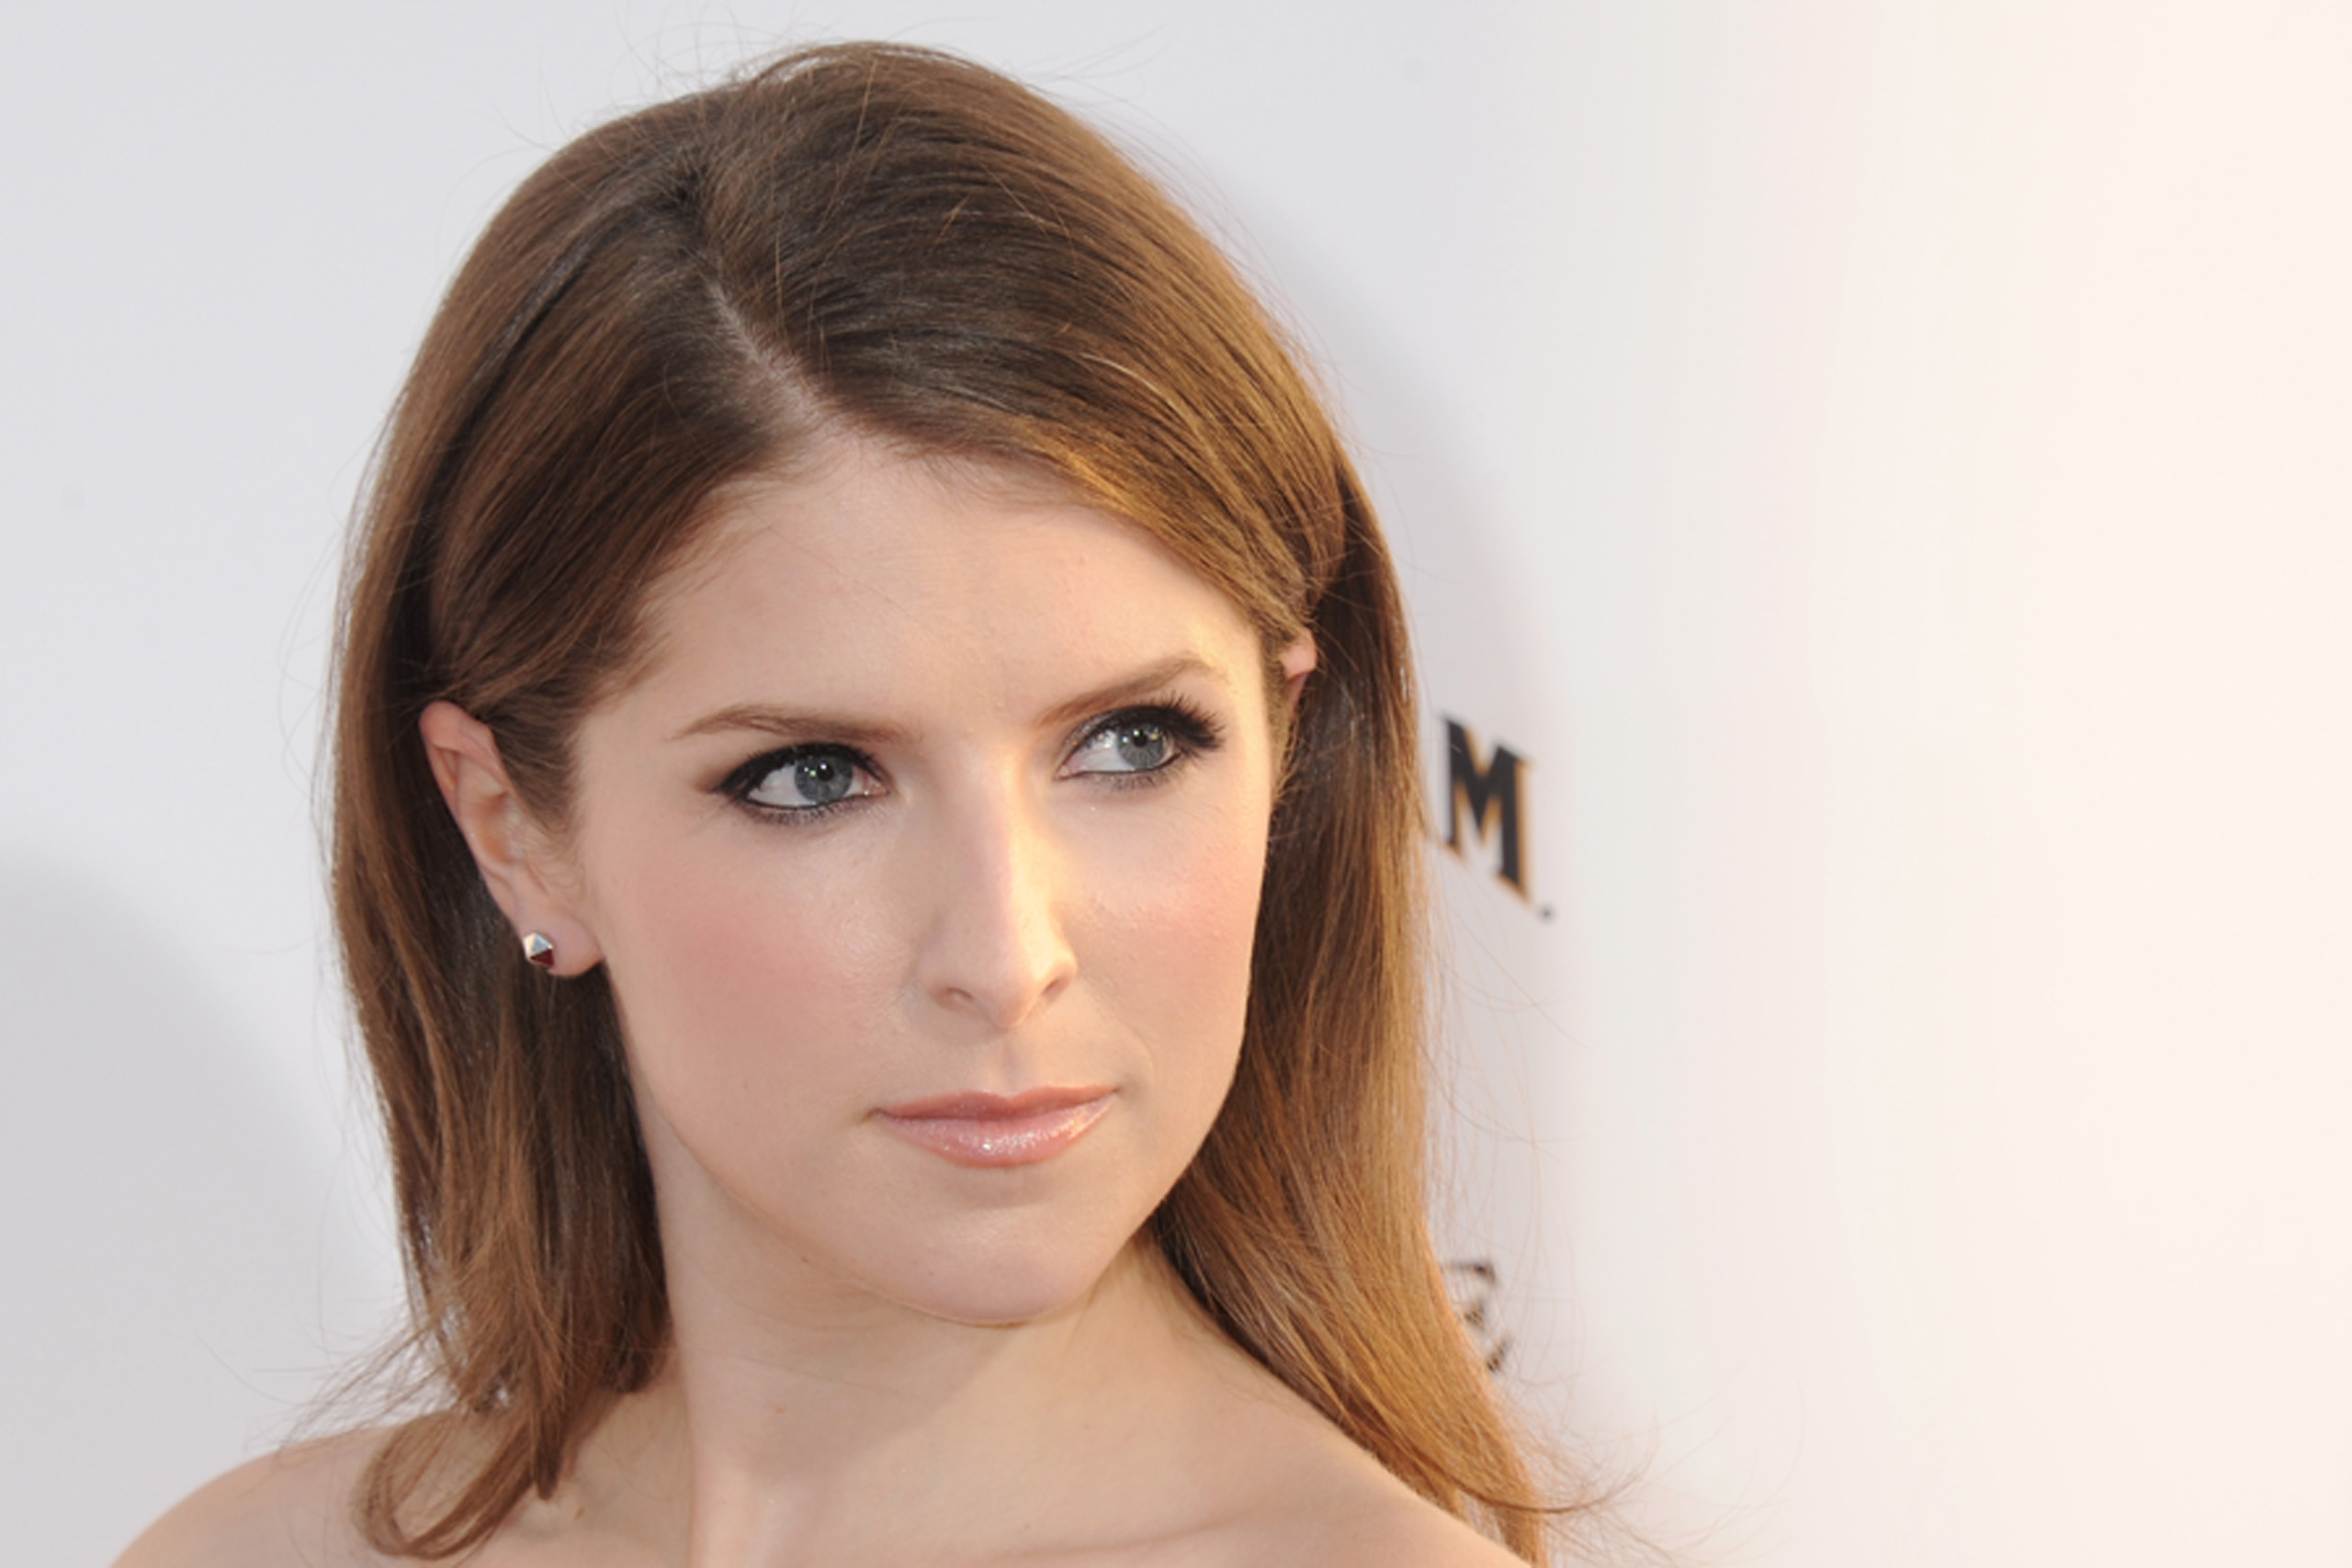 Anna Kendrick Wants to Play Marvel's Squirrel Girl | Time